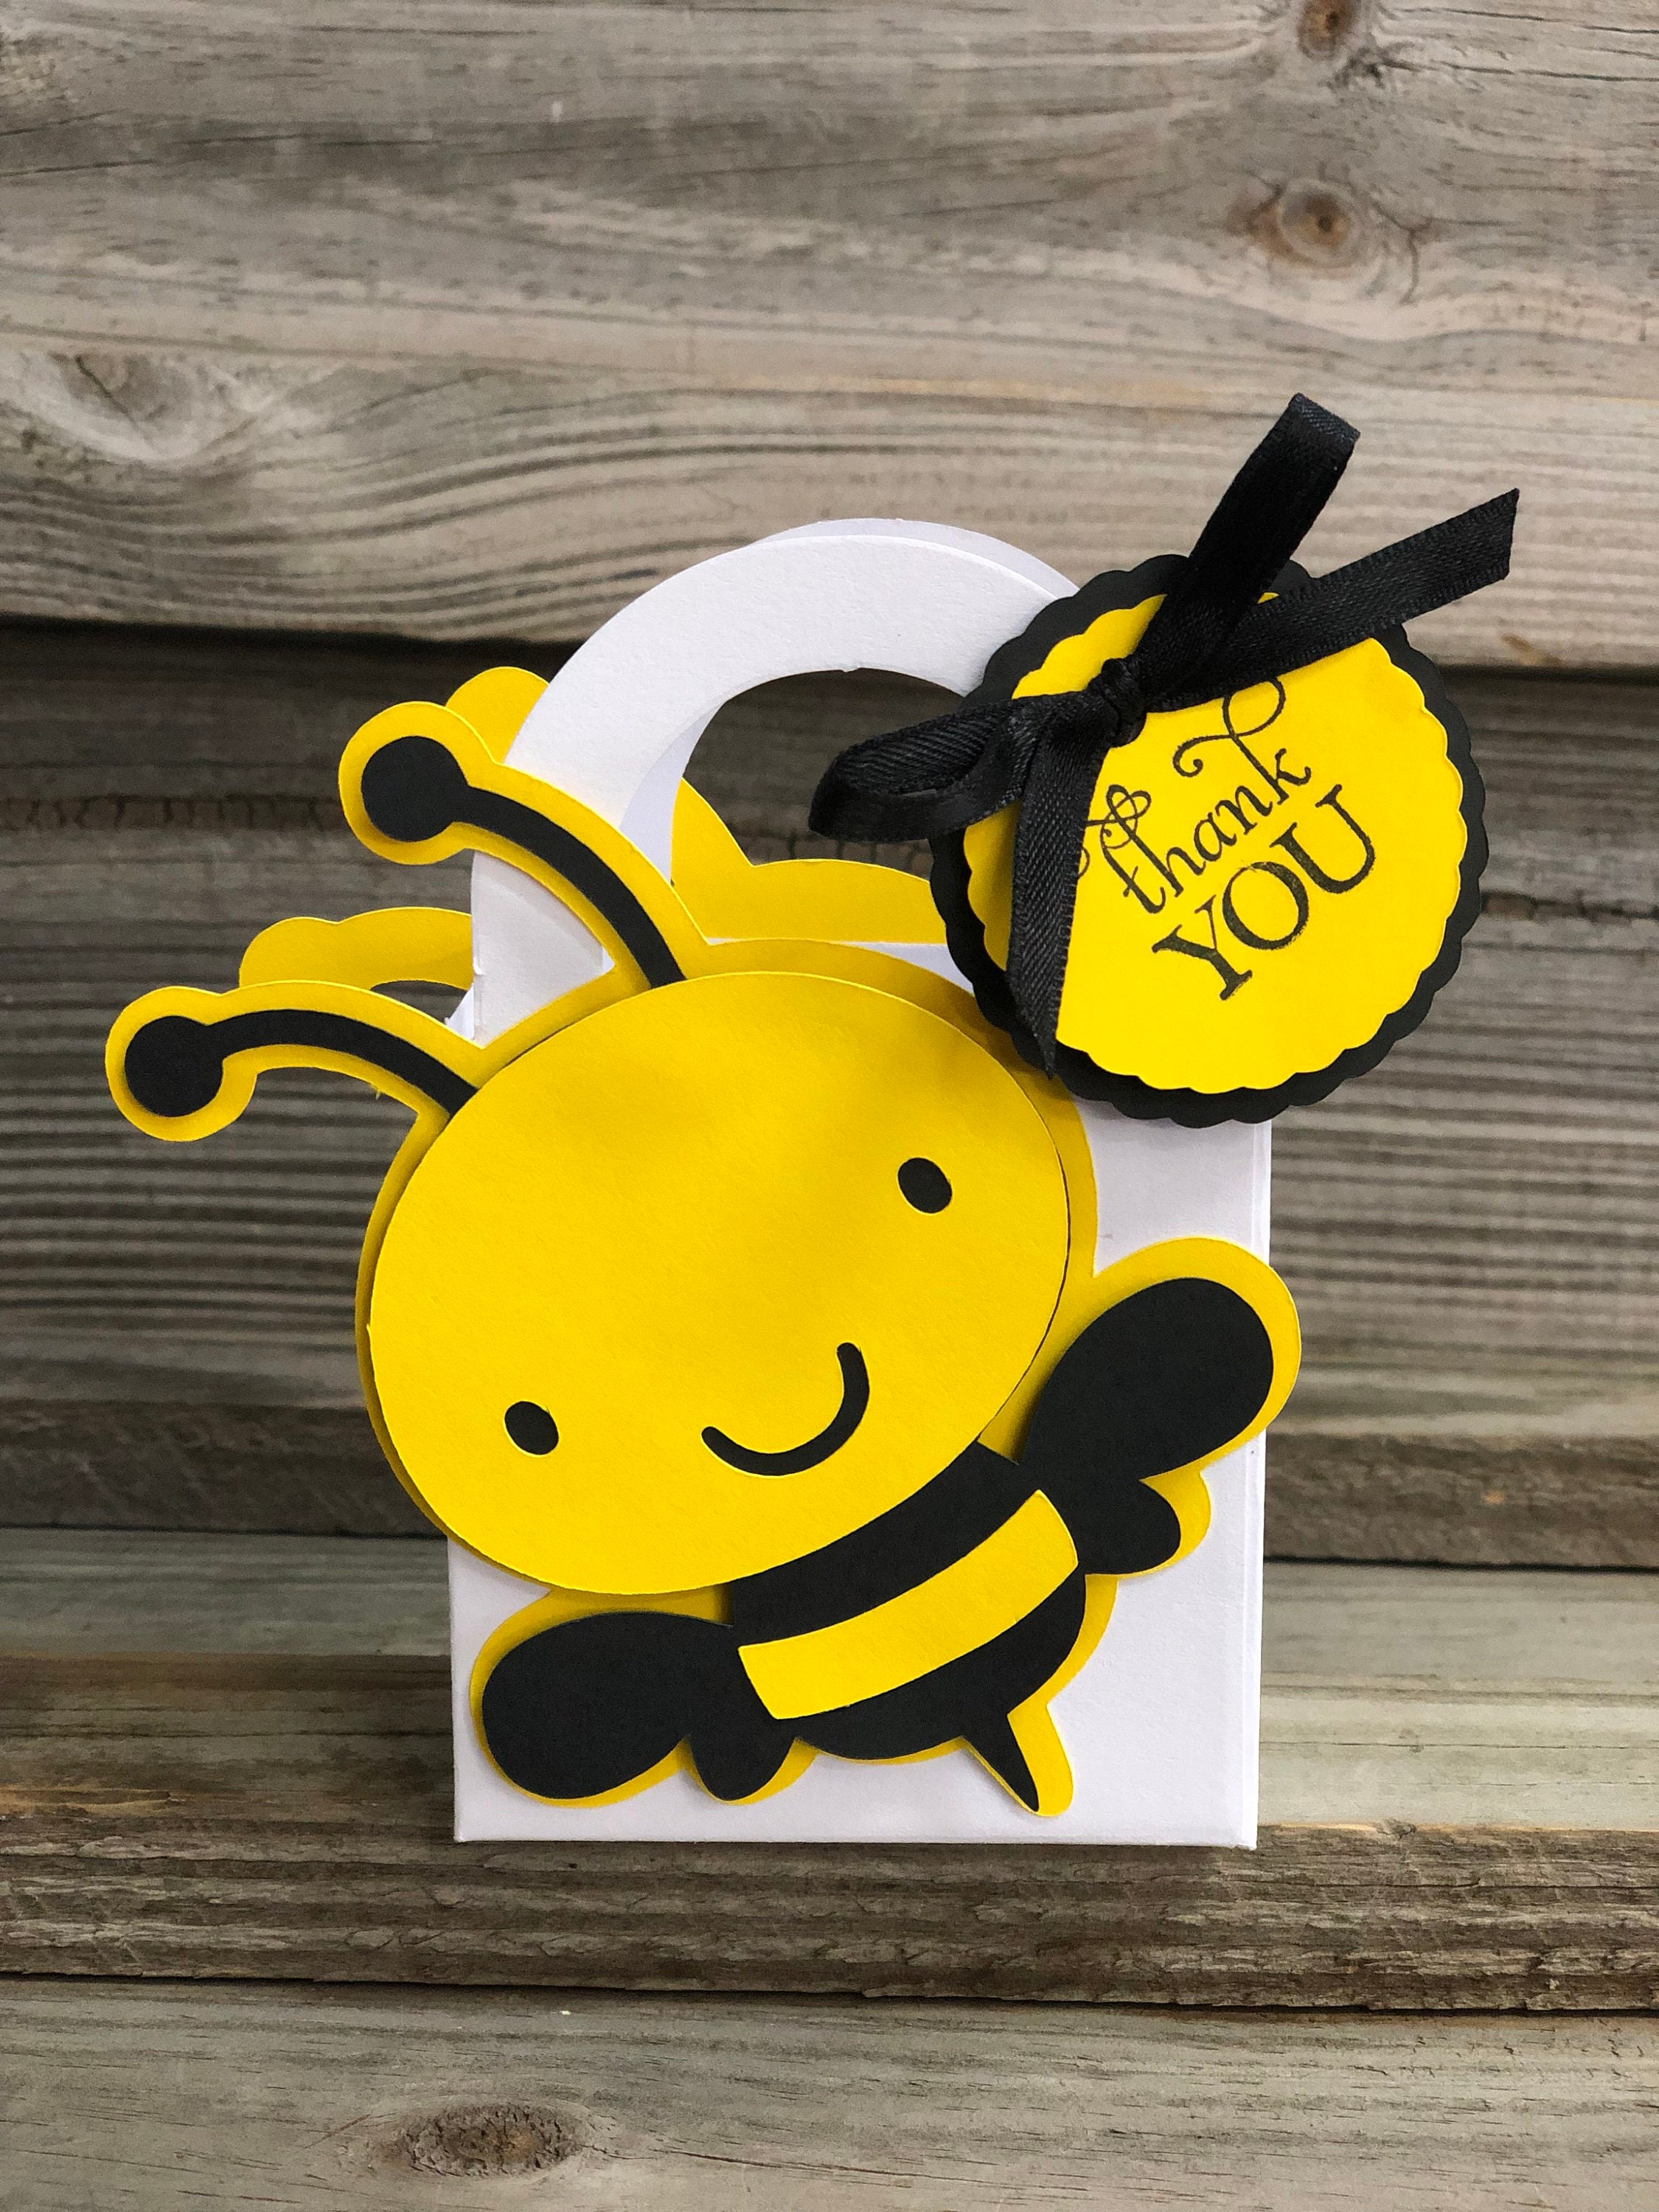 10pk Bumble Bee Lollipop stick holder Party Bags/favour/Yellow